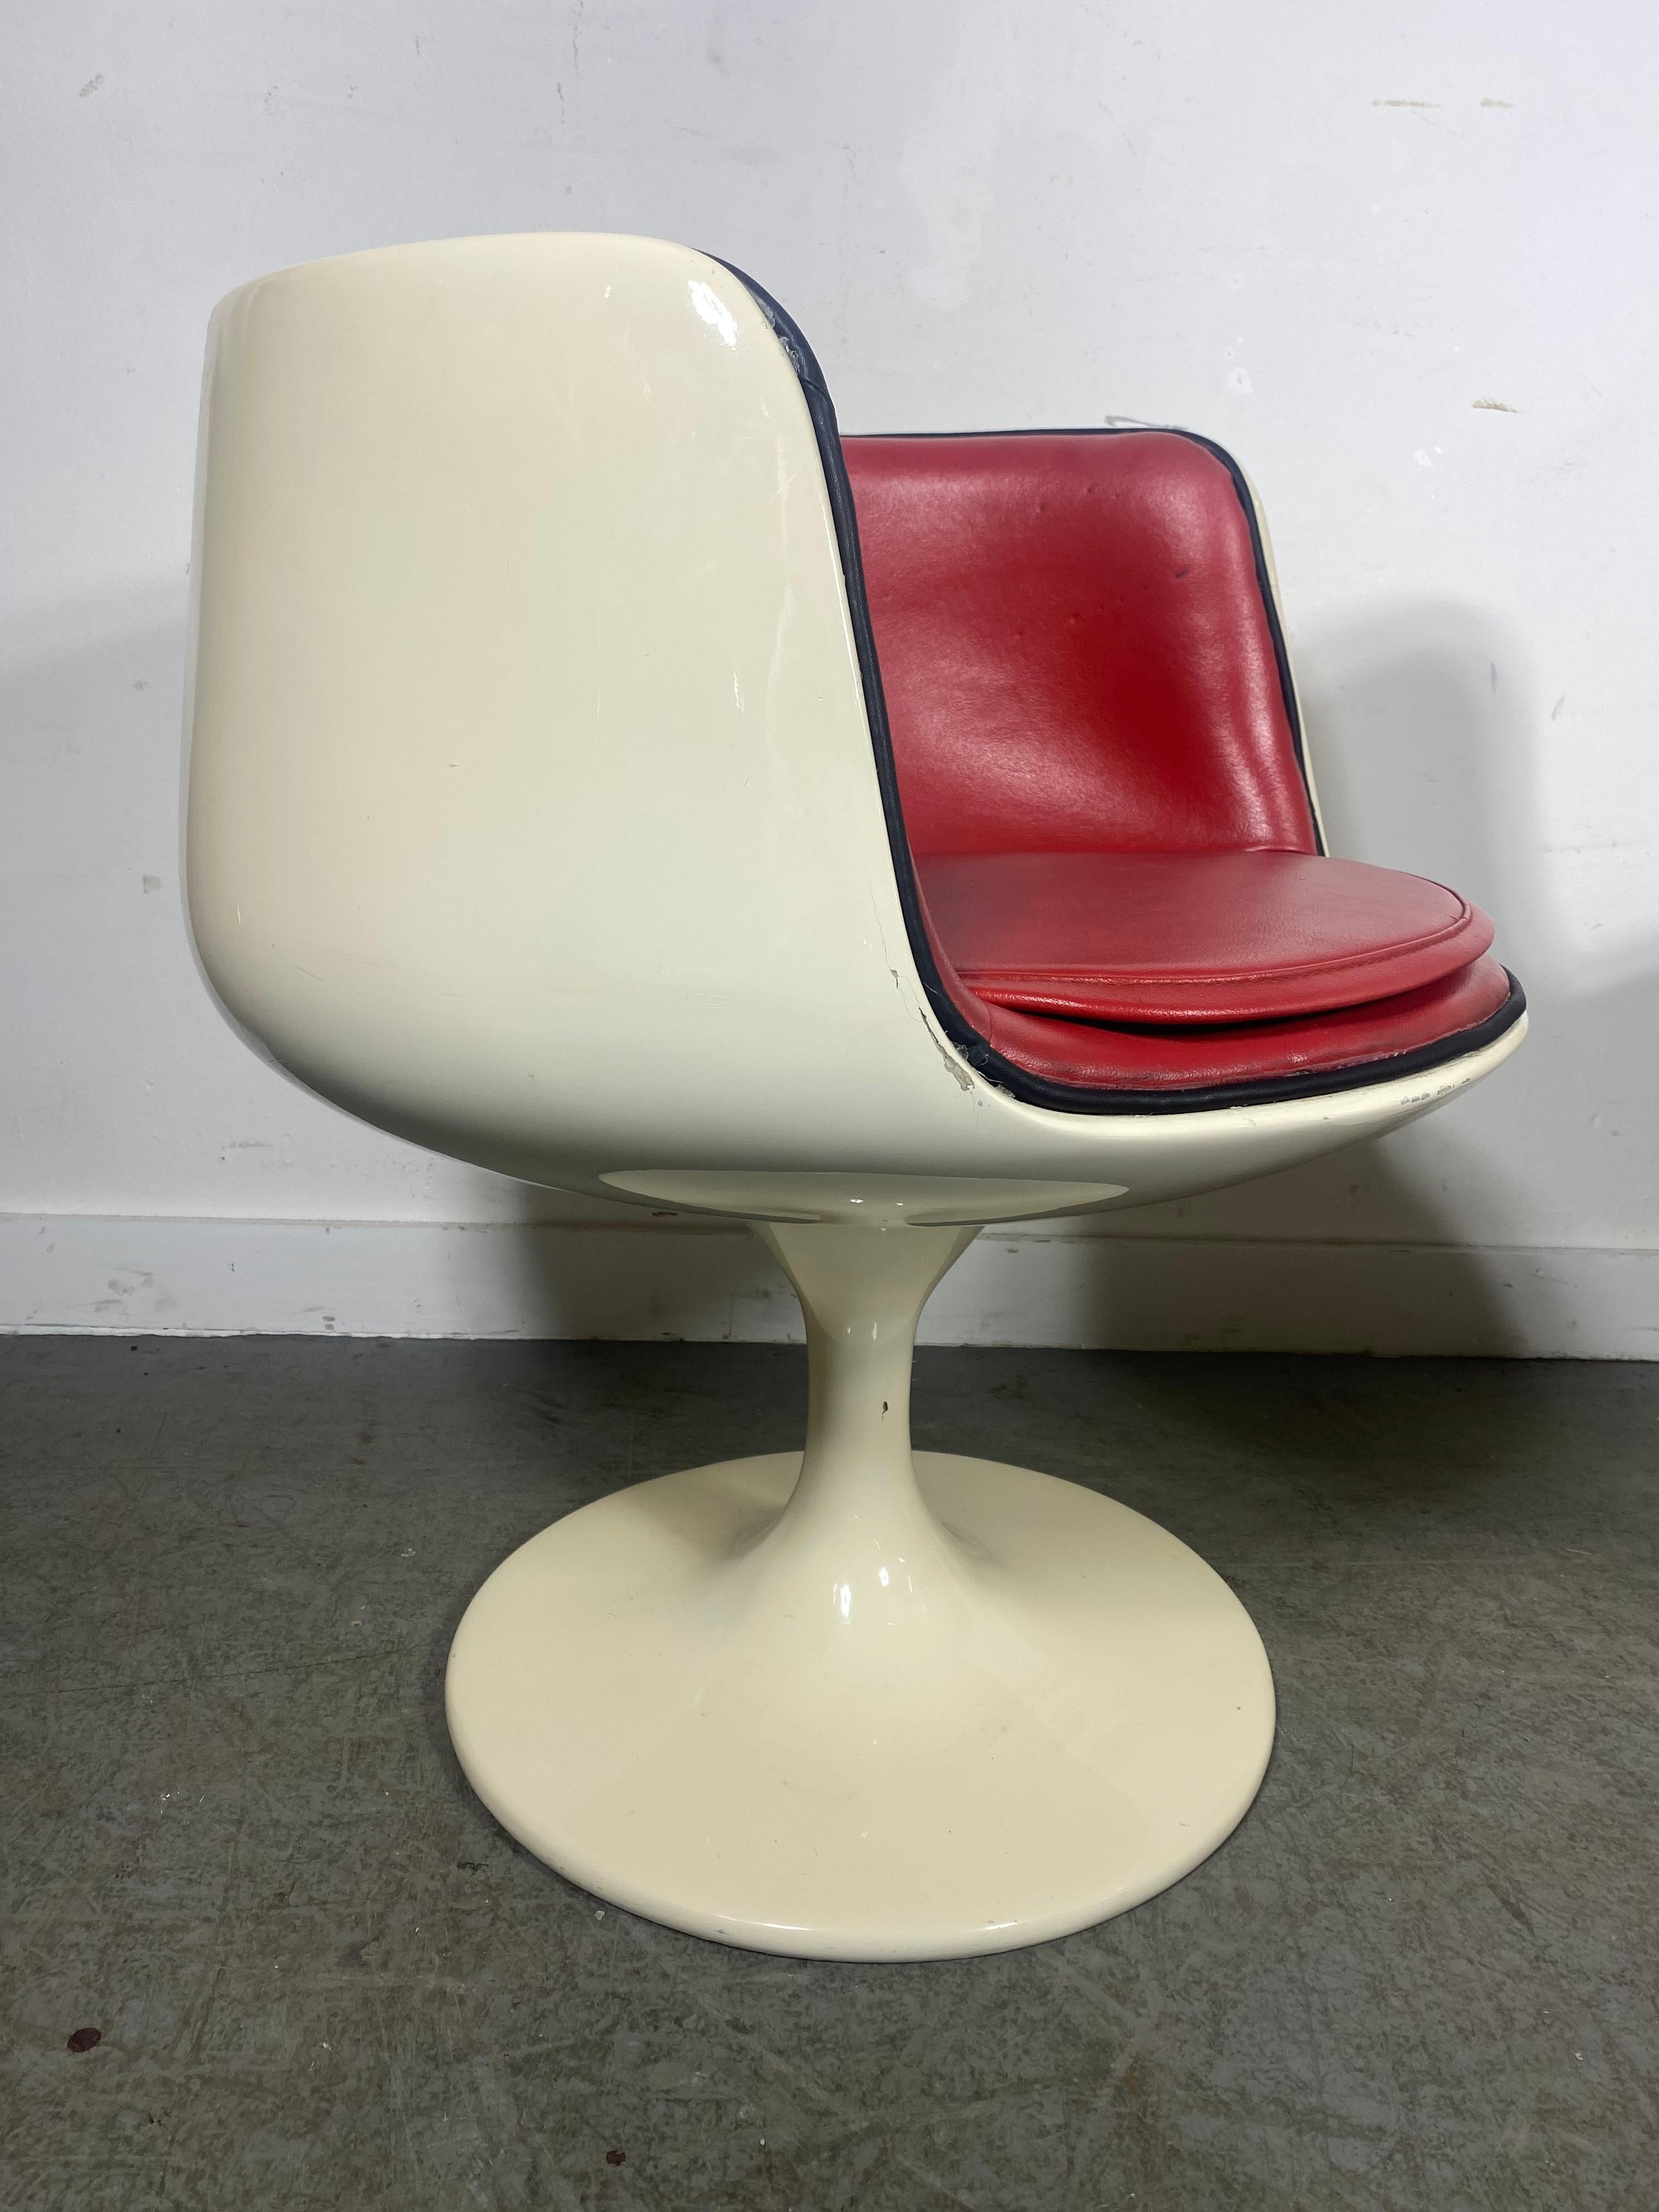 Original Cognac V.S.O.P chairs designed by Eero Aarnio and manufactured by Asko in Finland.

Sold as a set of 2
White fiberglass trumpet-shaped base with a swivel mechanism.
The seats and cushions in original rede leather upholstery.:  Nice original